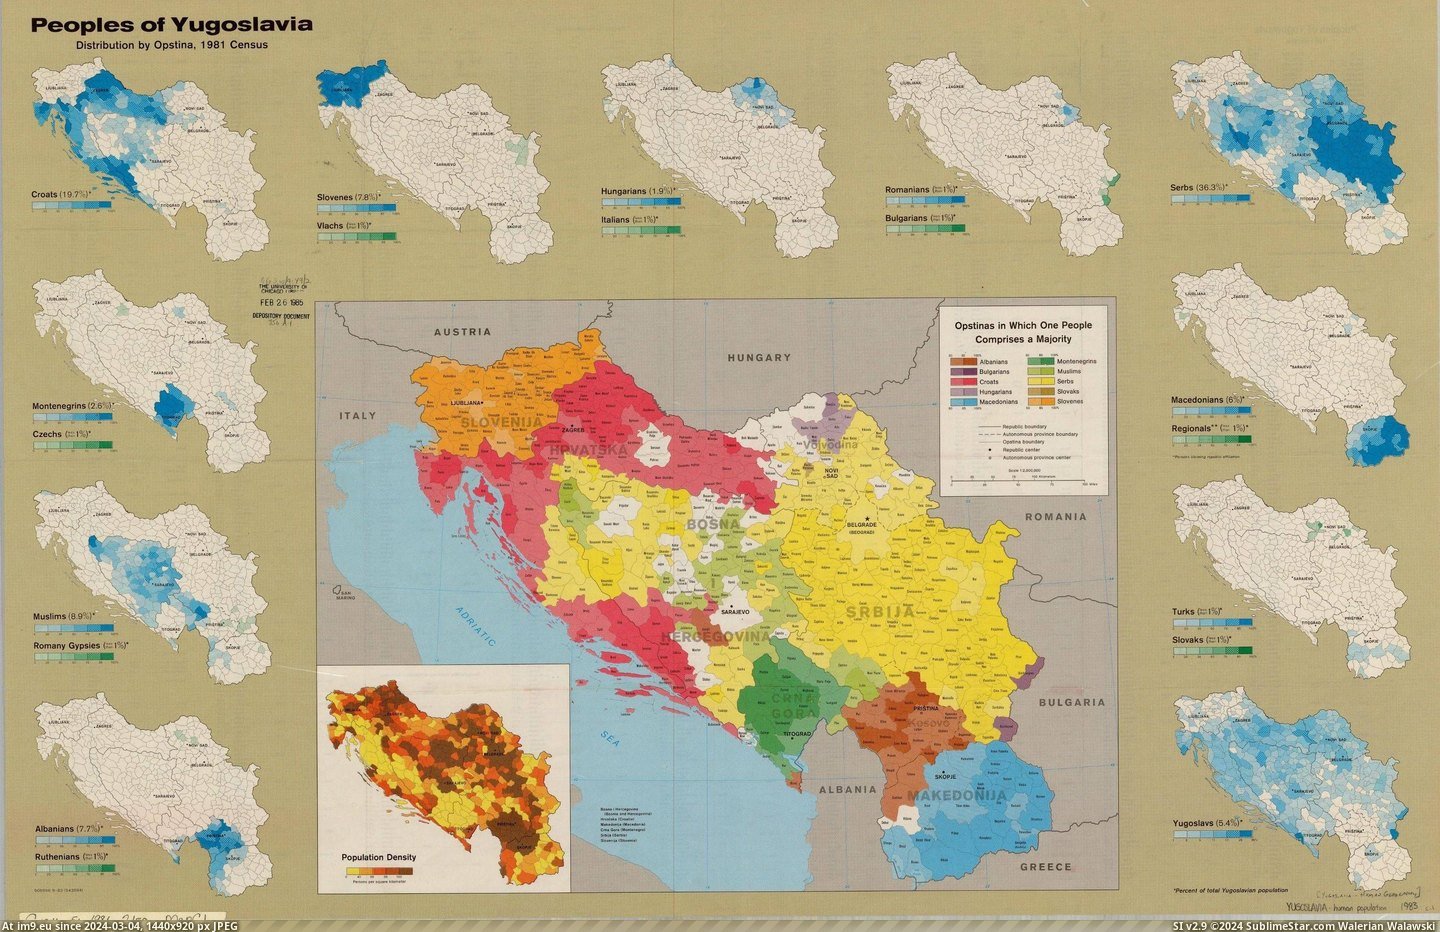 #Data #Distribution #Official #Cia #Peoples #Yugoslavia #Census #Ops #Tina [Mapporn] 'Peoples of Yugoslavia distribution by opština' from official 1981 CIA census data [4595x2956] Pic. (Image of album My r/MAPS favs))